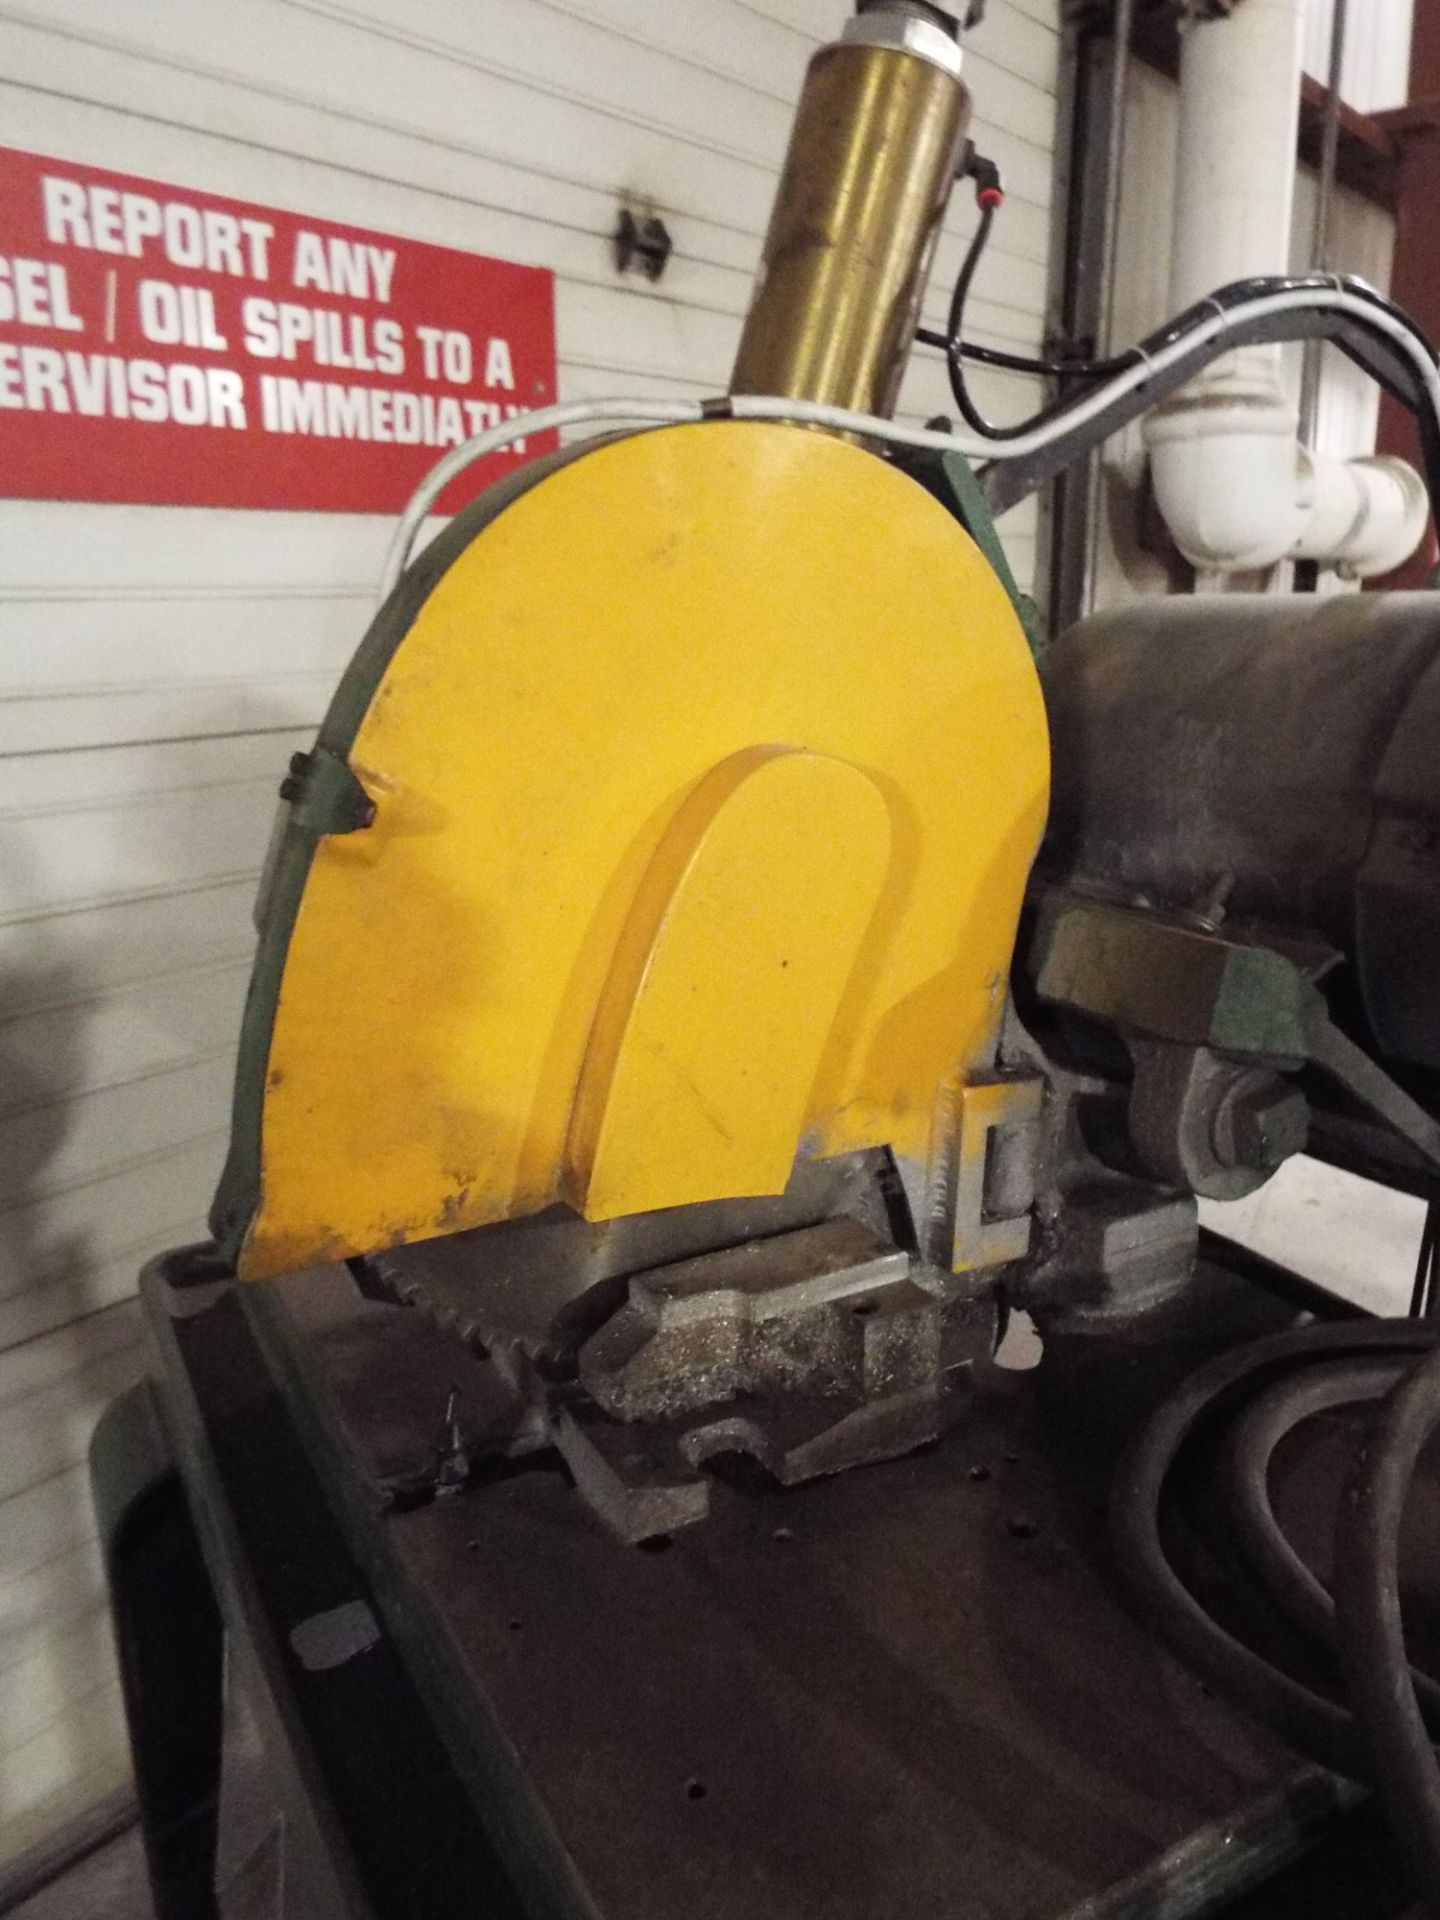 MFG UNKNOWN ALUMINUM COLD CUT SAW WITH 10HP BALDOR MOTOR AND COOLANT, S/N: N/A - Image 2 of 2